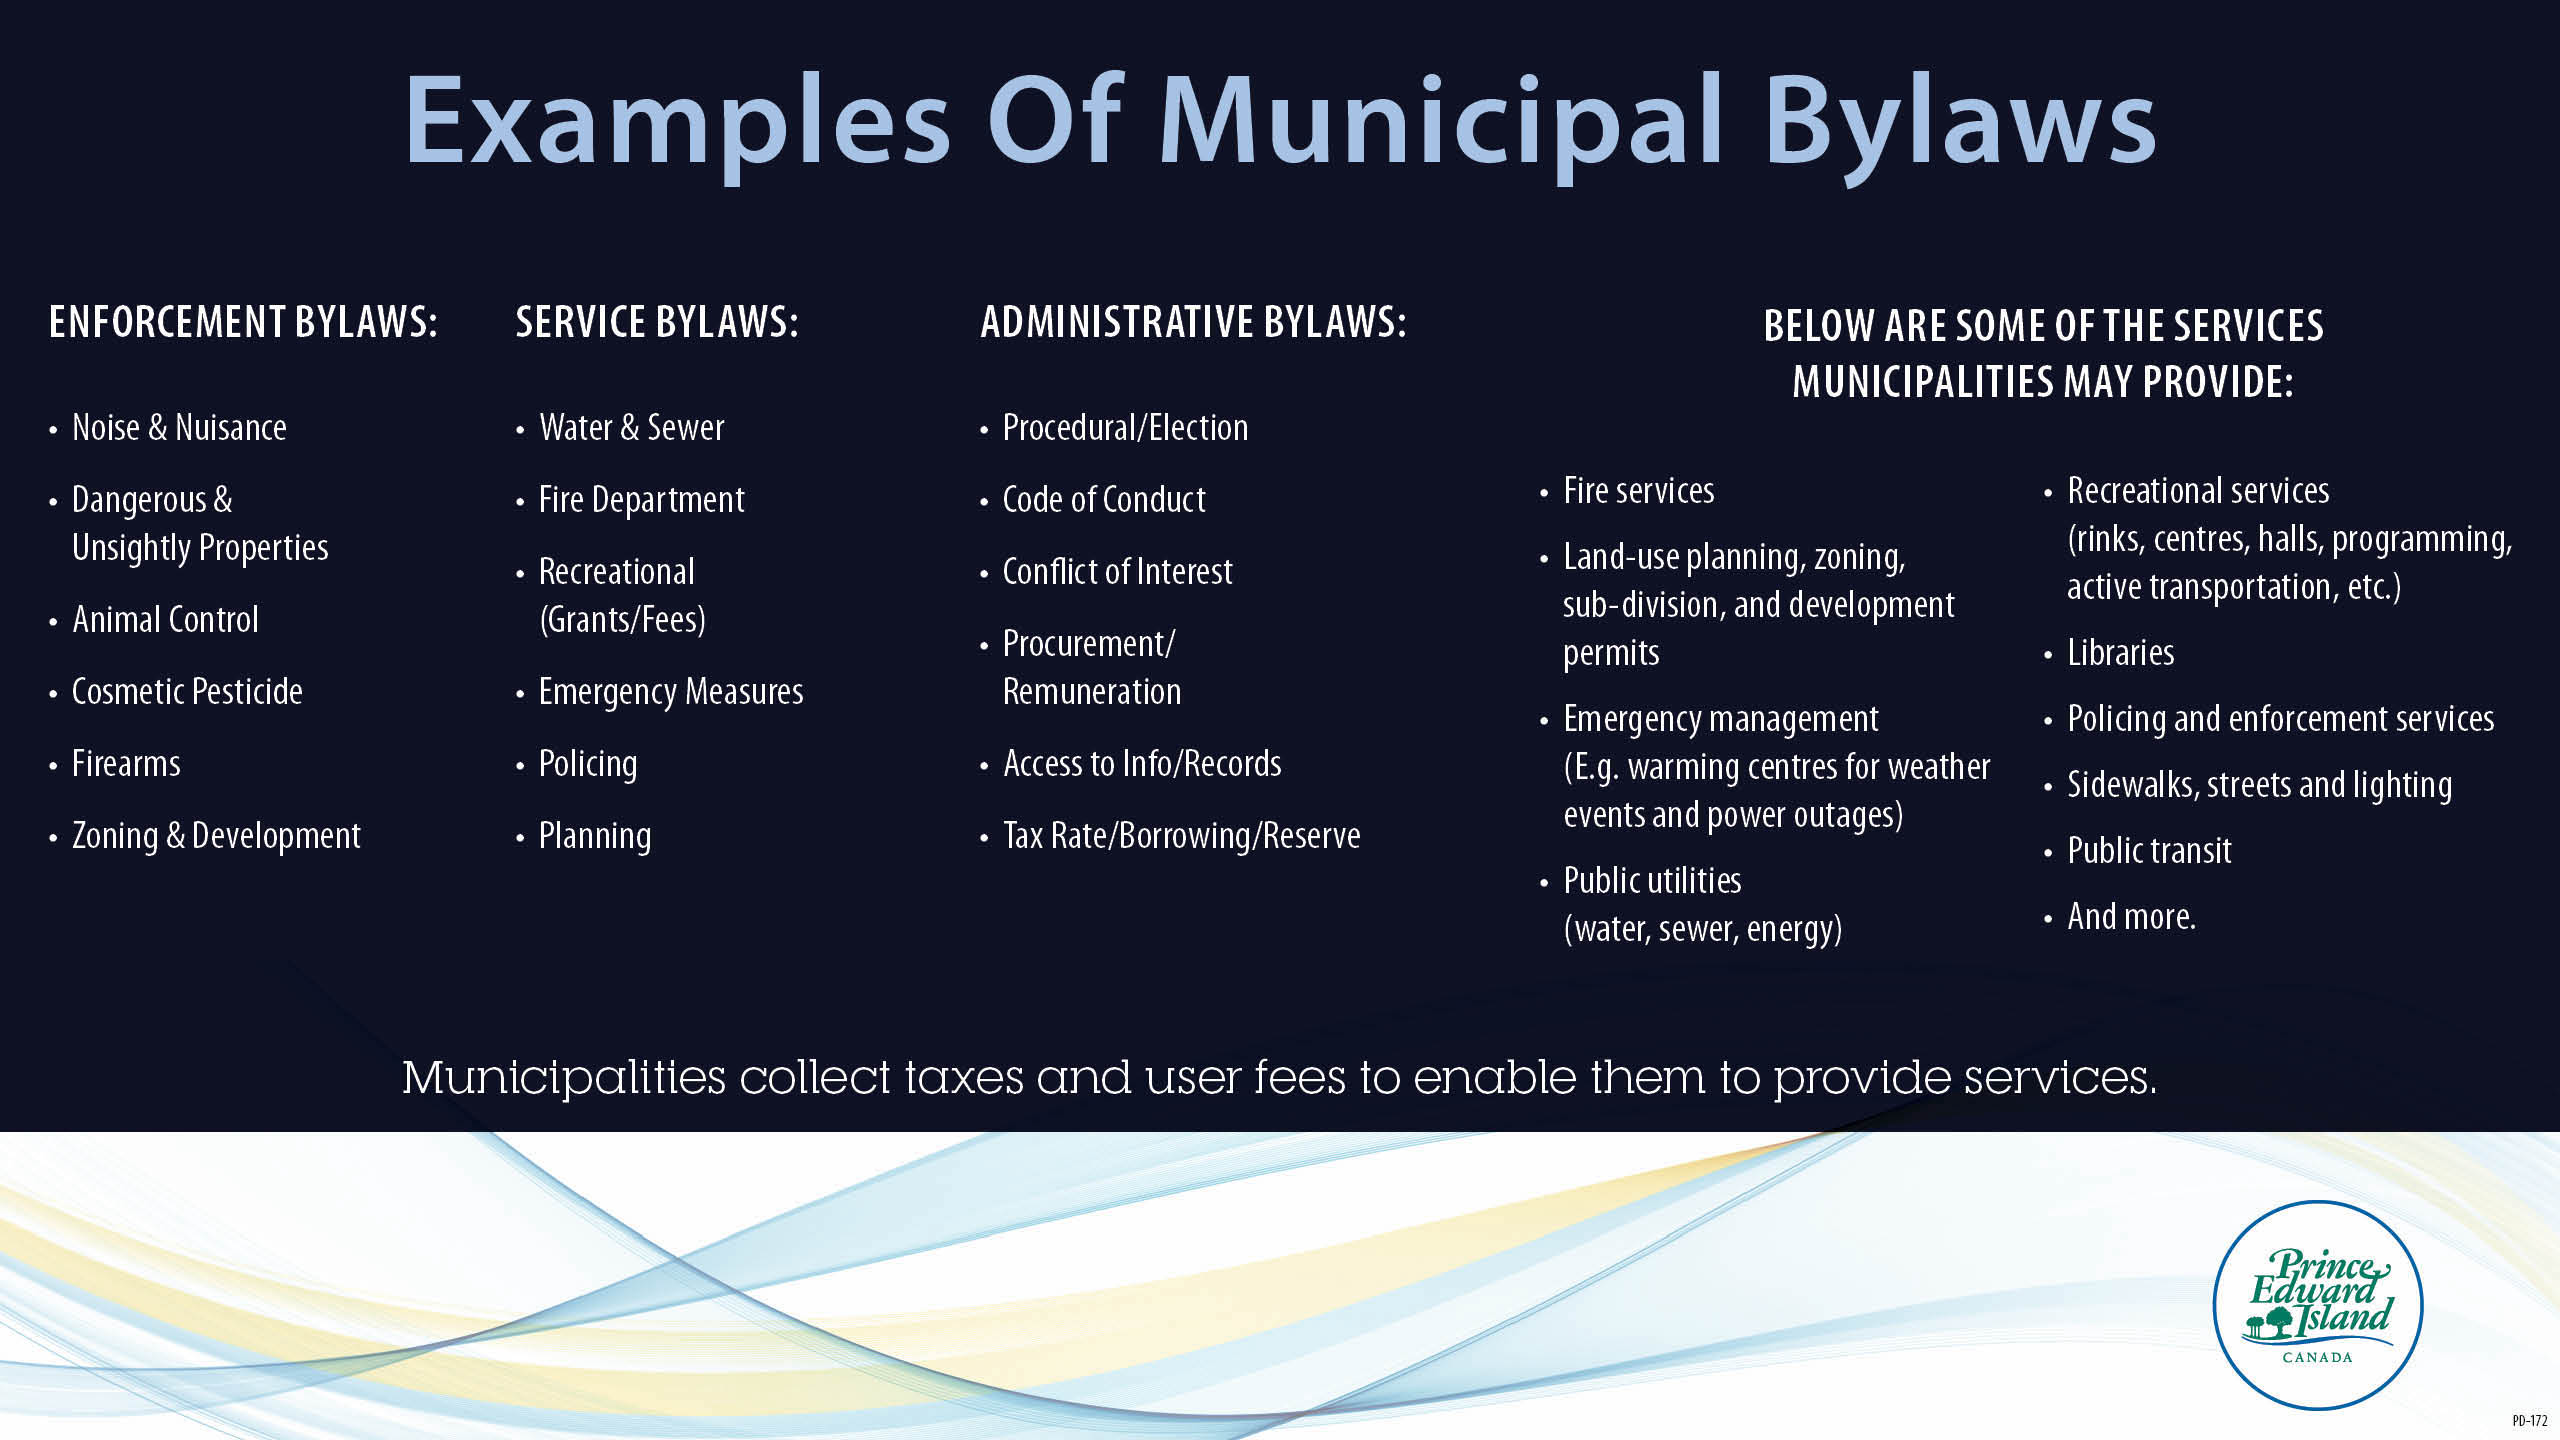 Examples of Municipal Bylaws Infographic